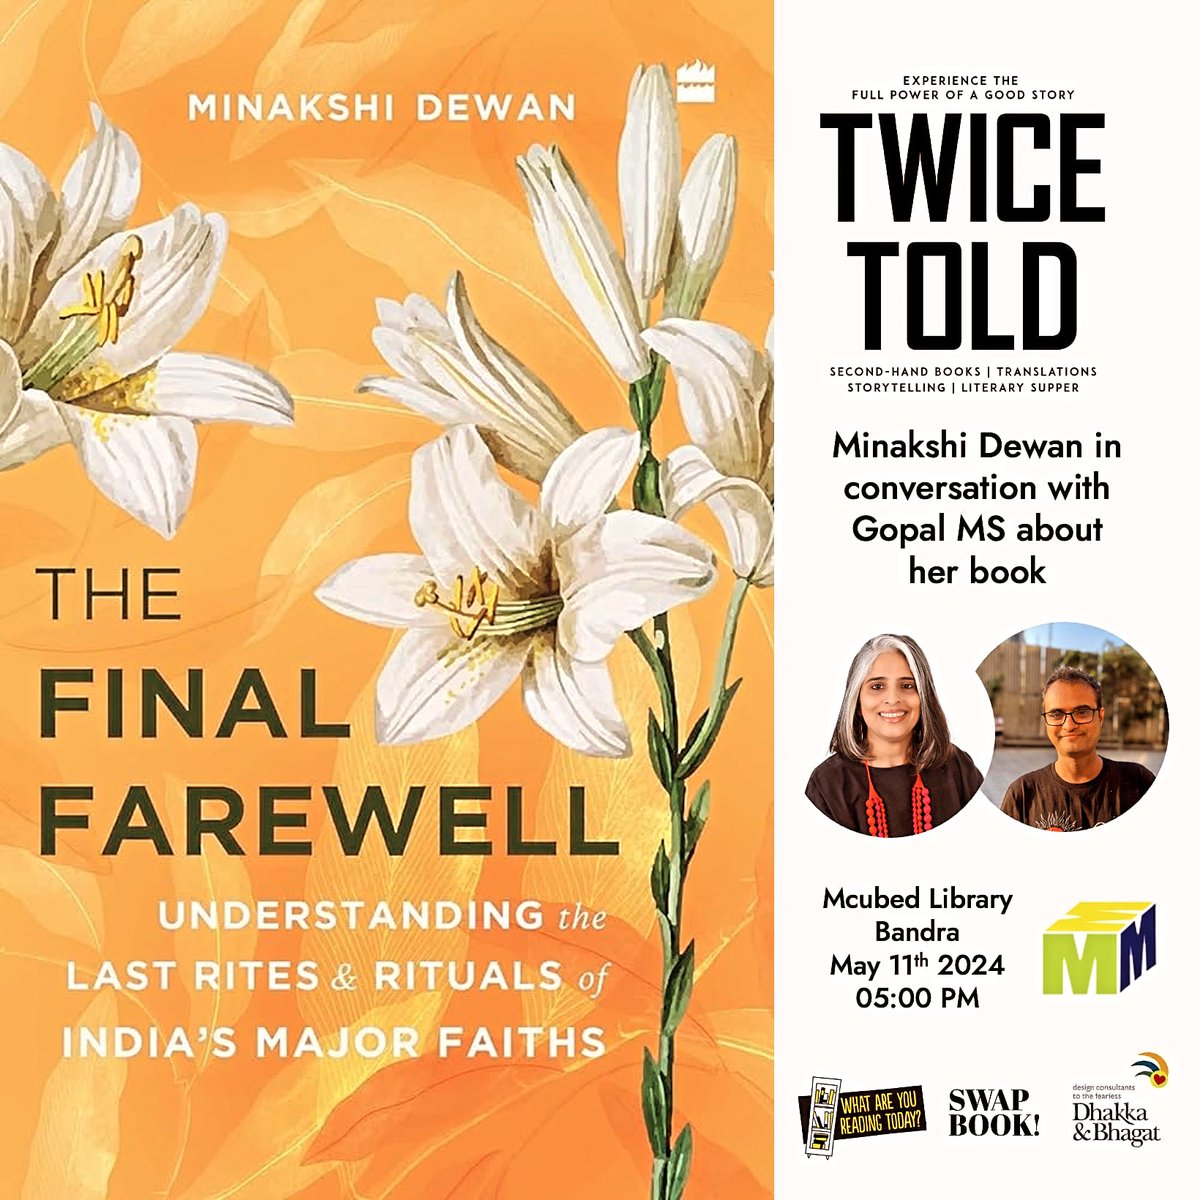 Mumbaikars, have you registered yet? I will be doing a book talk on 11th May in Bandra at 5 pm. I will be in conversation with the amazing chronicler mumbaipaused, @SloganMurugan. Please join us. @HarperCollinsIN Date: 11th May, 5 pm. Register here 👇 insider.in/twicetold-with…